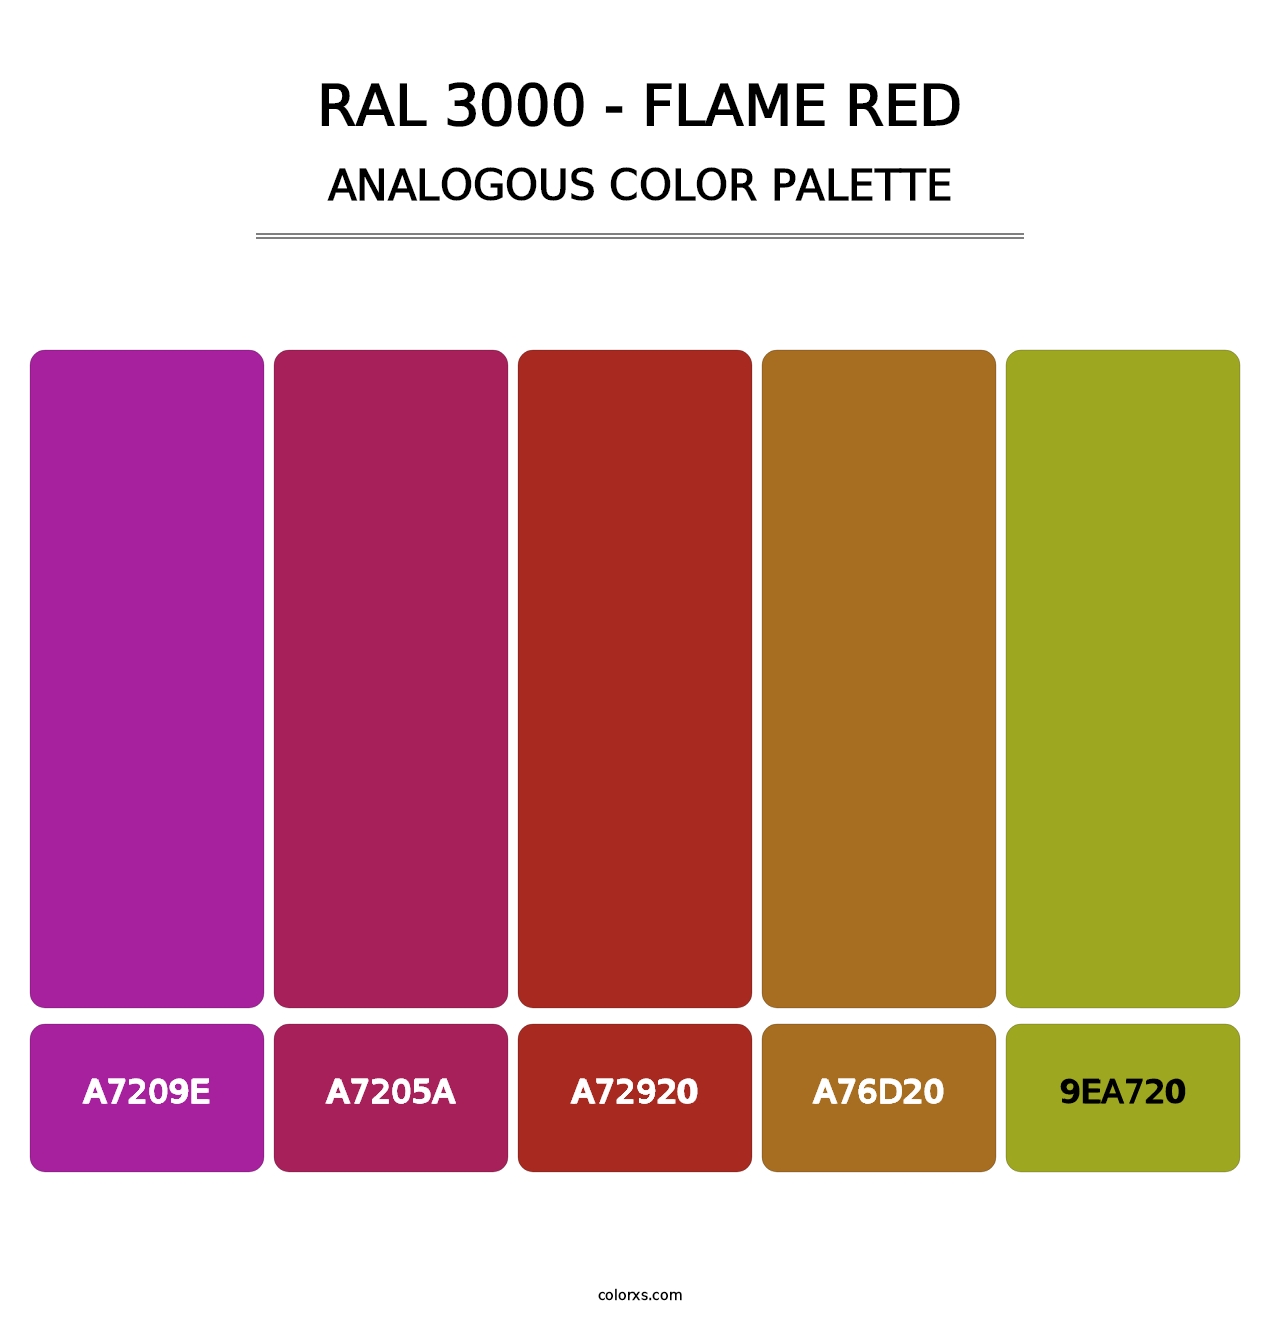 RAL 3000 - Flame Red - Analogous Color Palette